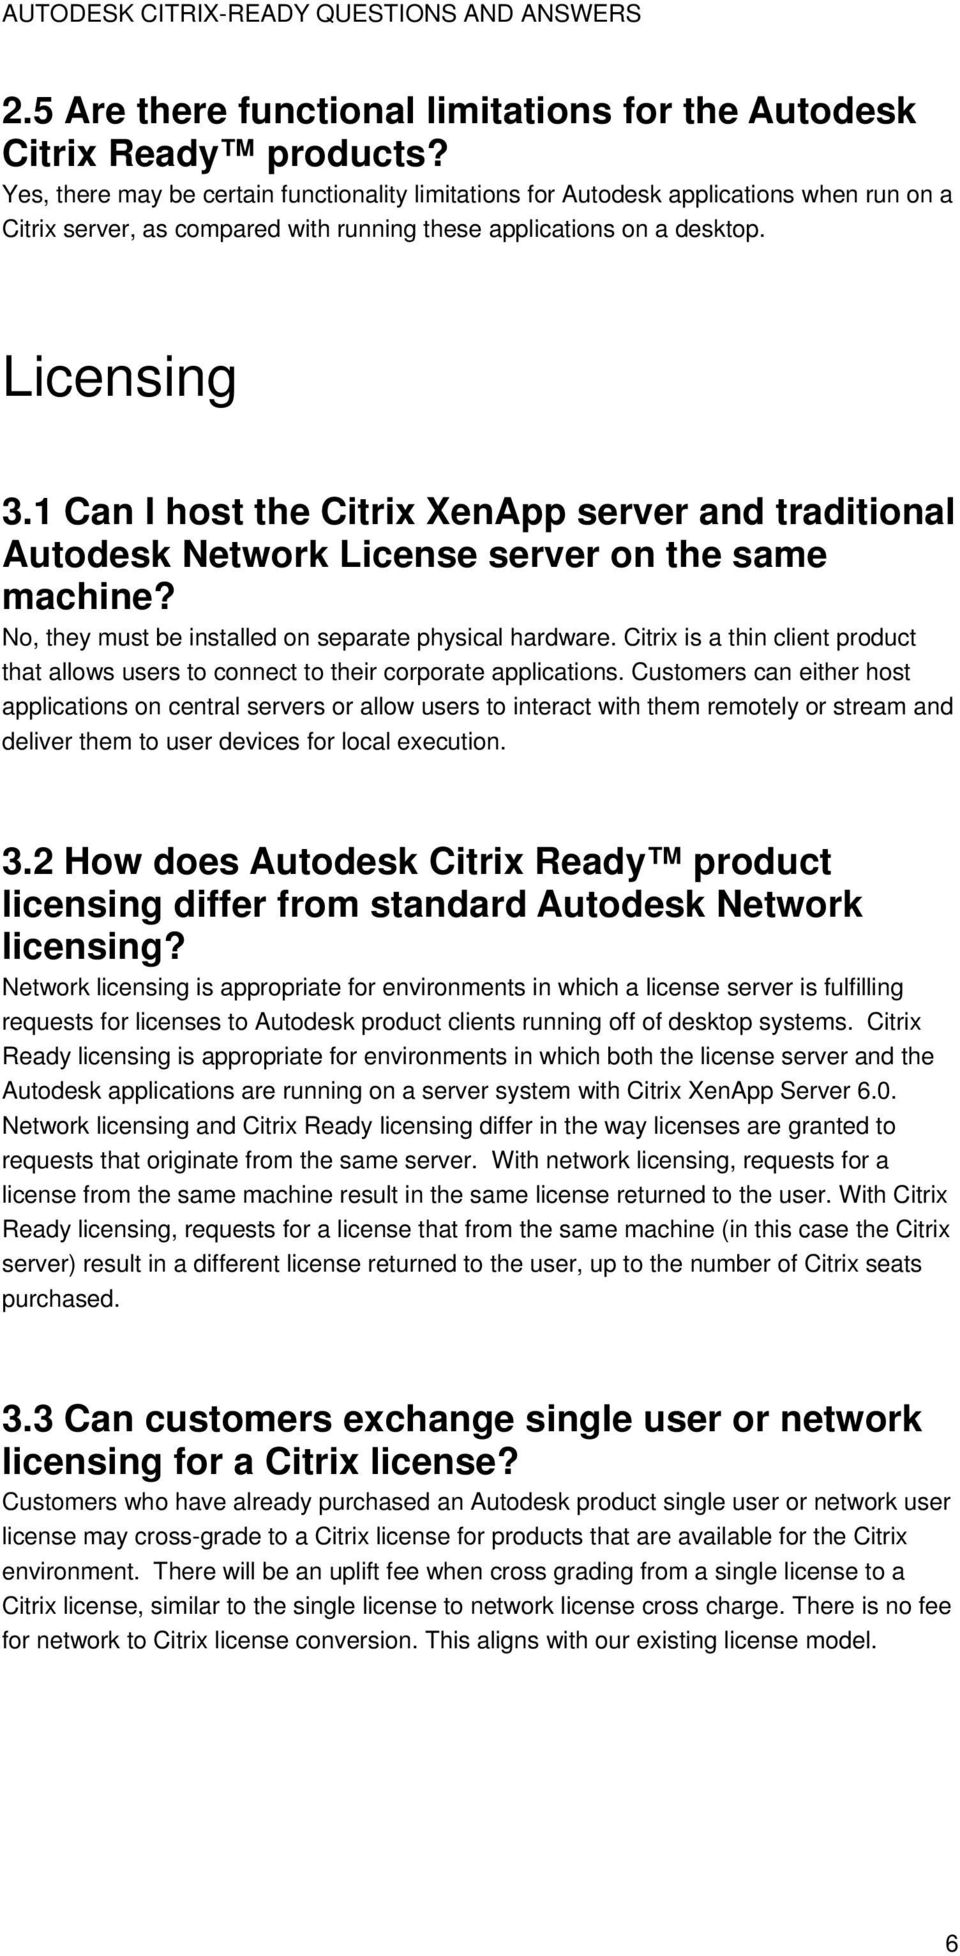 1 Can I host the Citrix XenApp server and traditional Autodesk Network License server on the same machine? No, they must be installed on separate physical hardware.